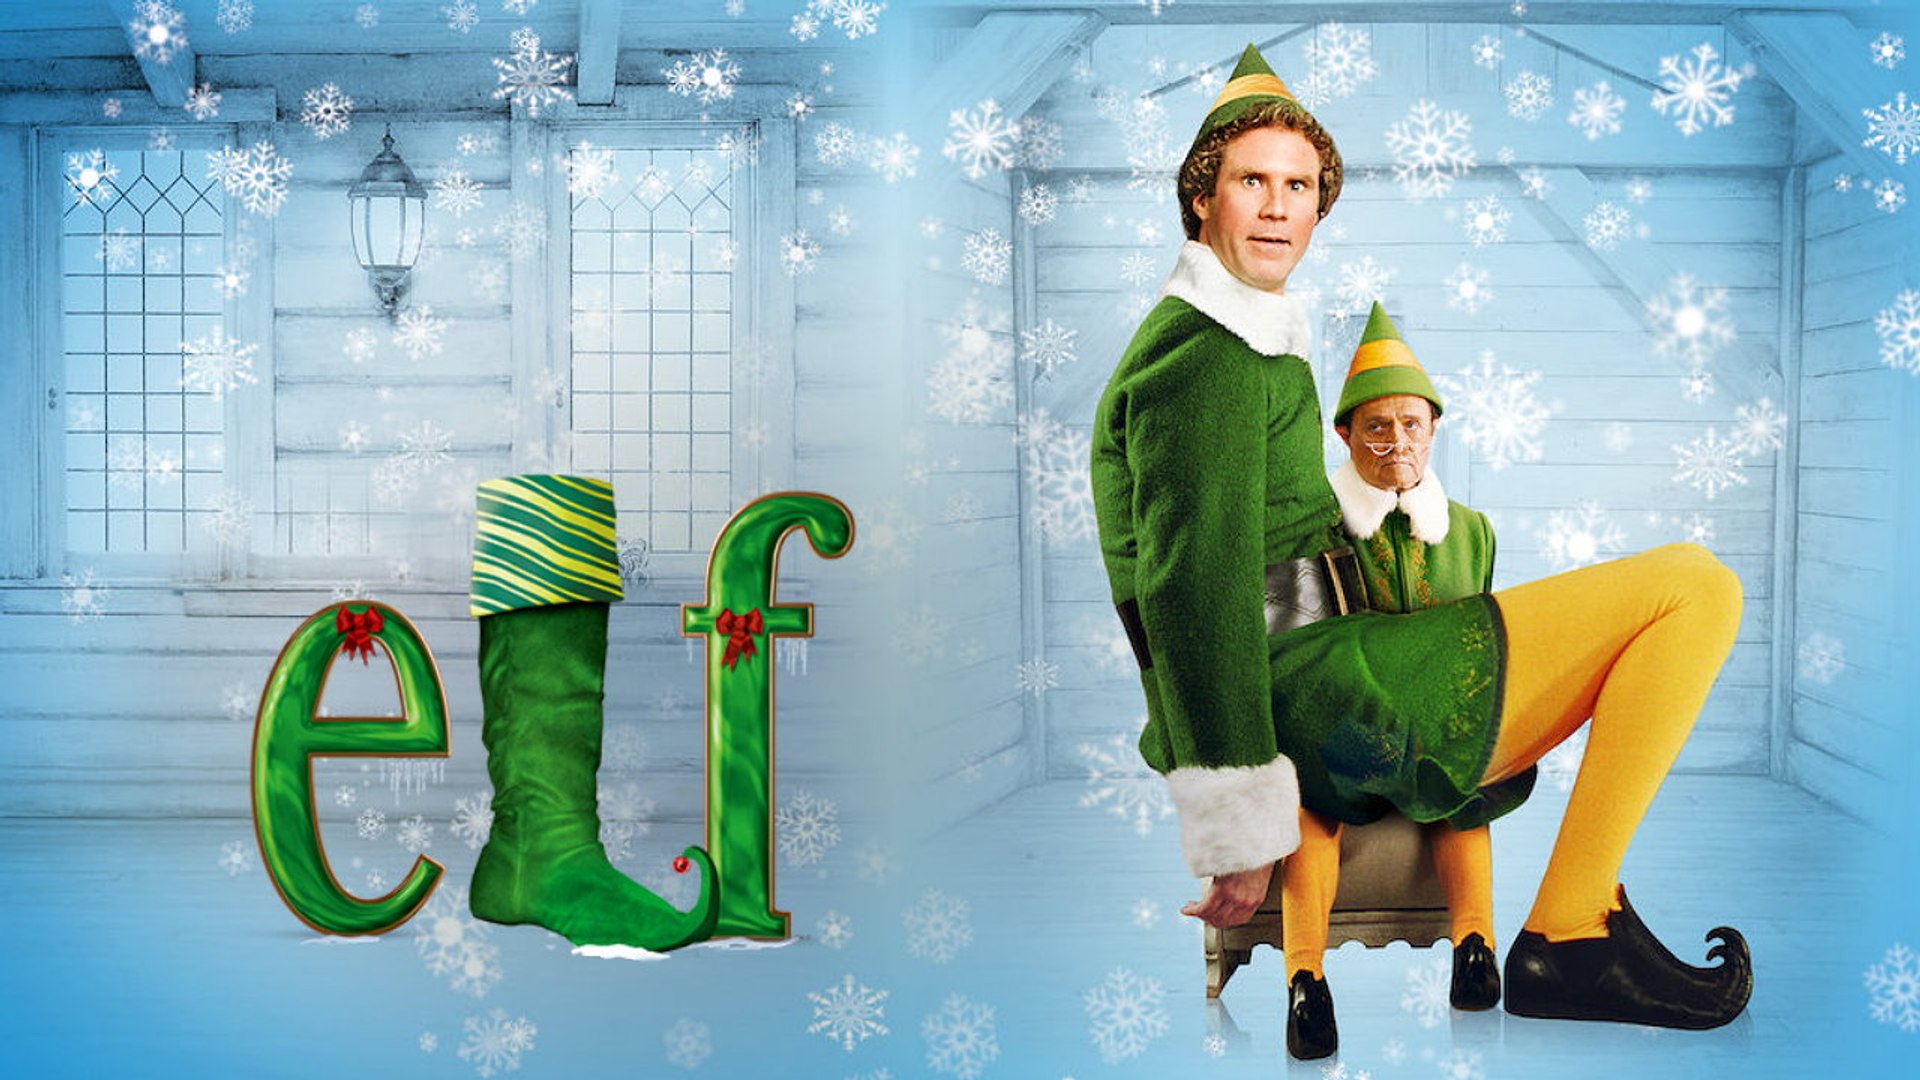 how old is will ferrell in elf